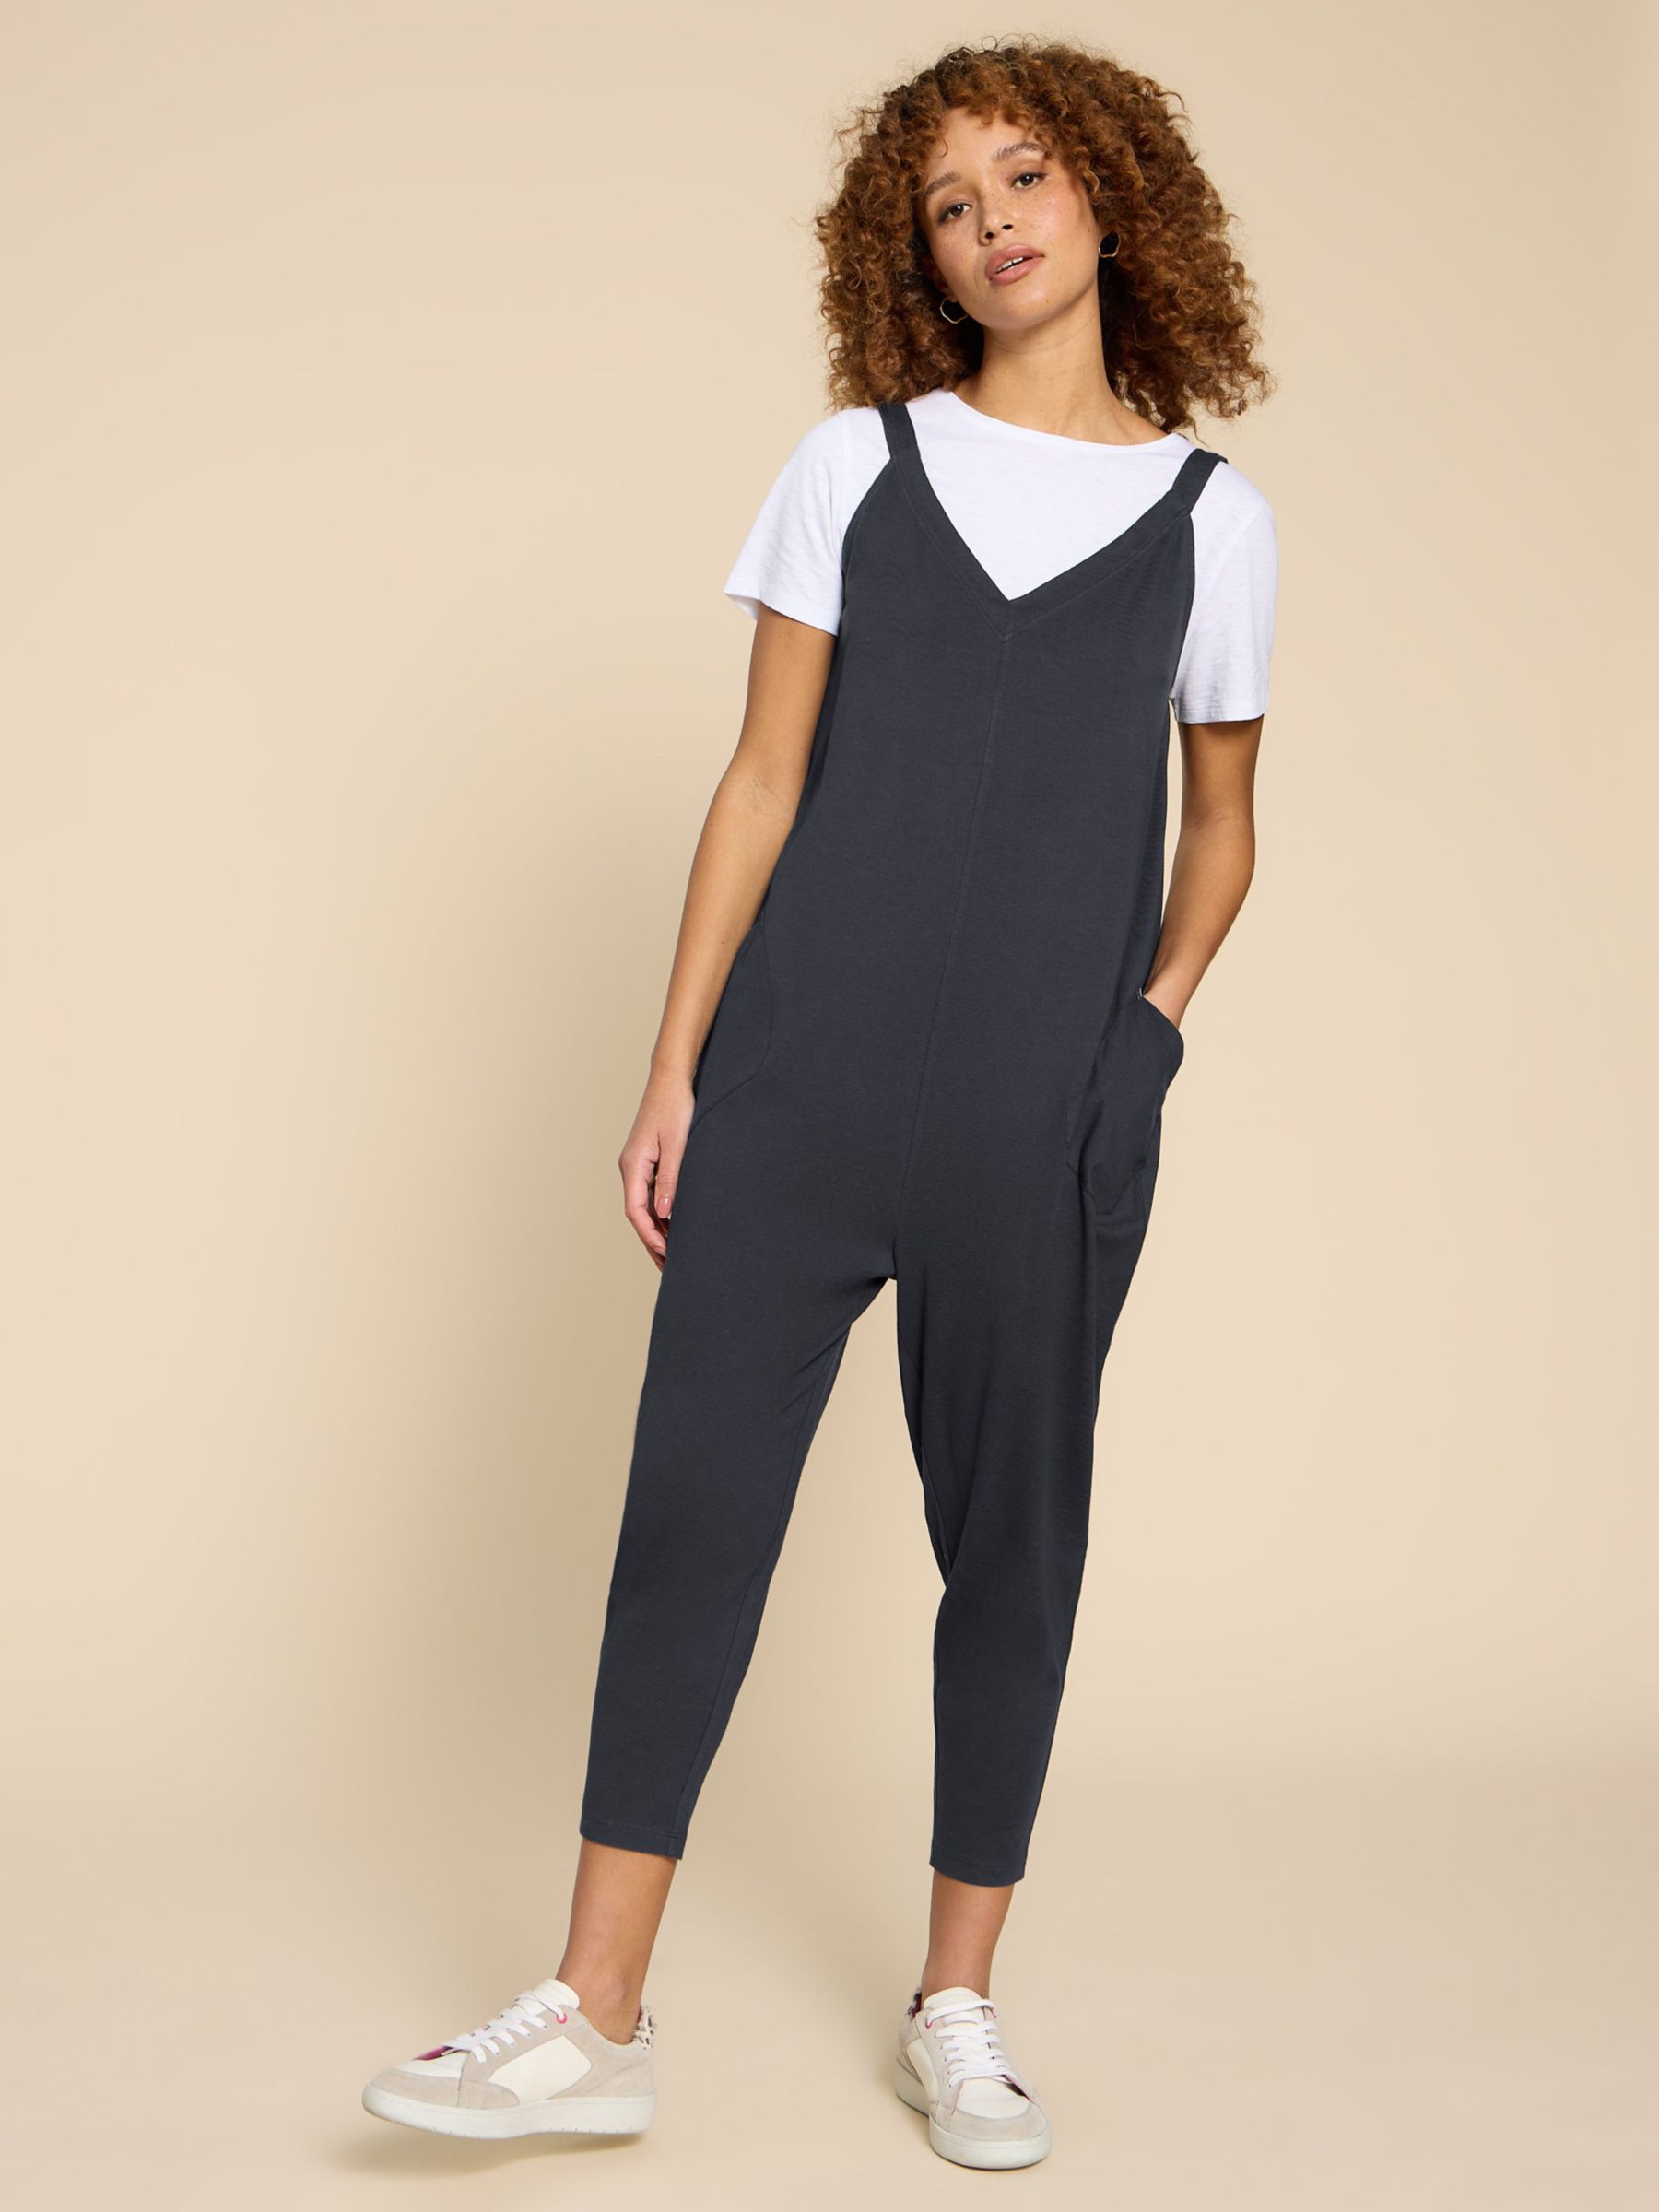 White Stuff Selina Slouchy Jumpsuit, Charcoal Grey at John Lewis & Partners